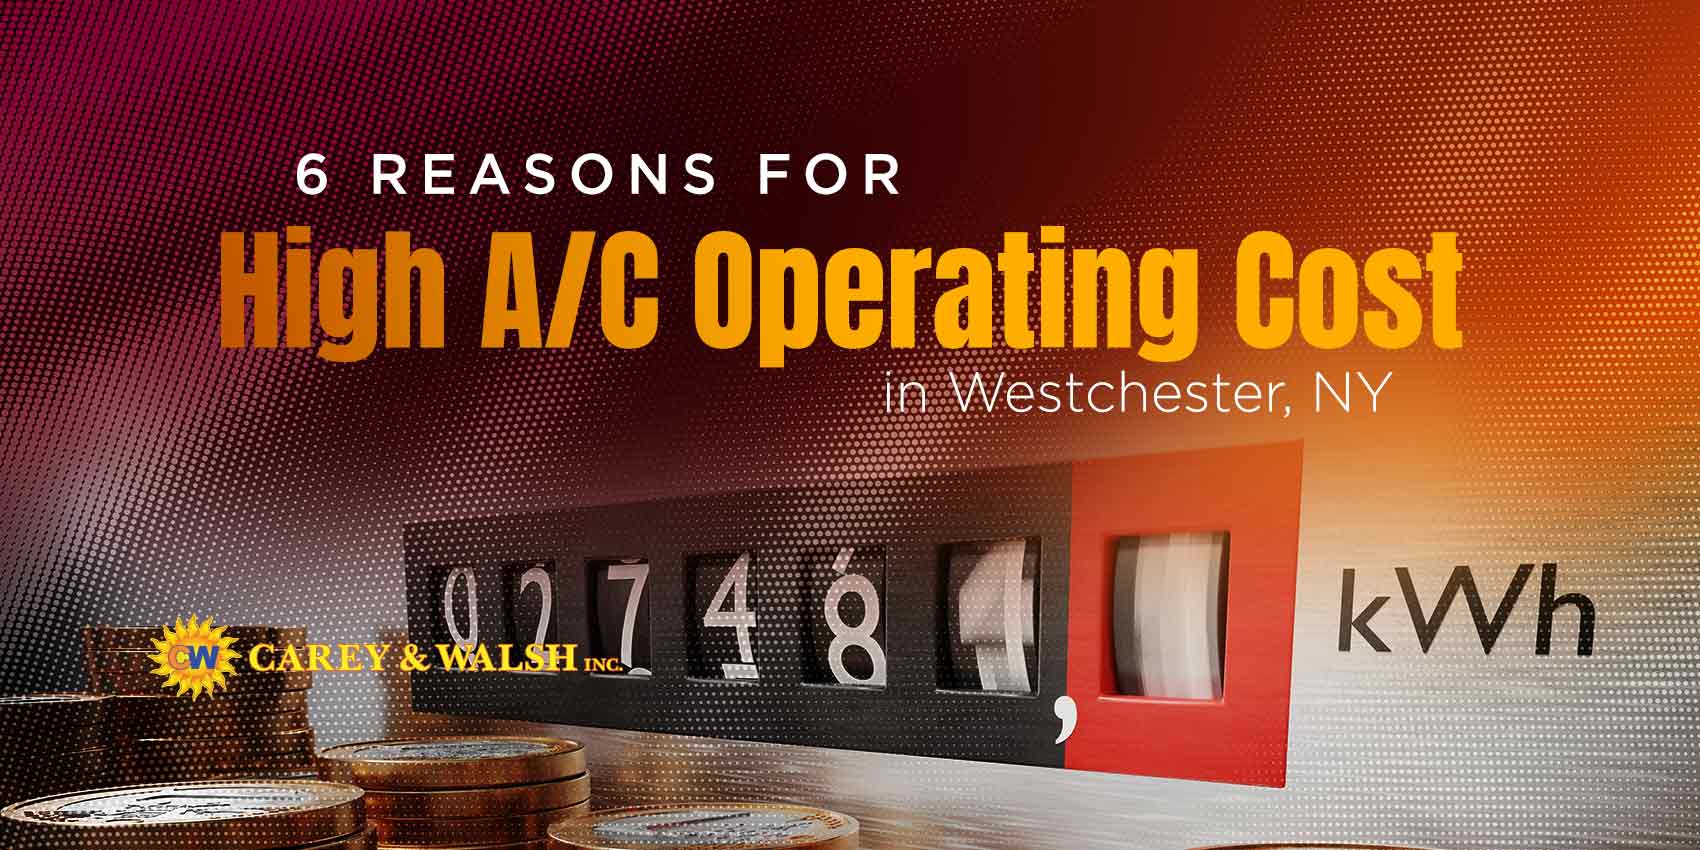 6 Reasons for High A/C Operating Cost in Westchester, NY